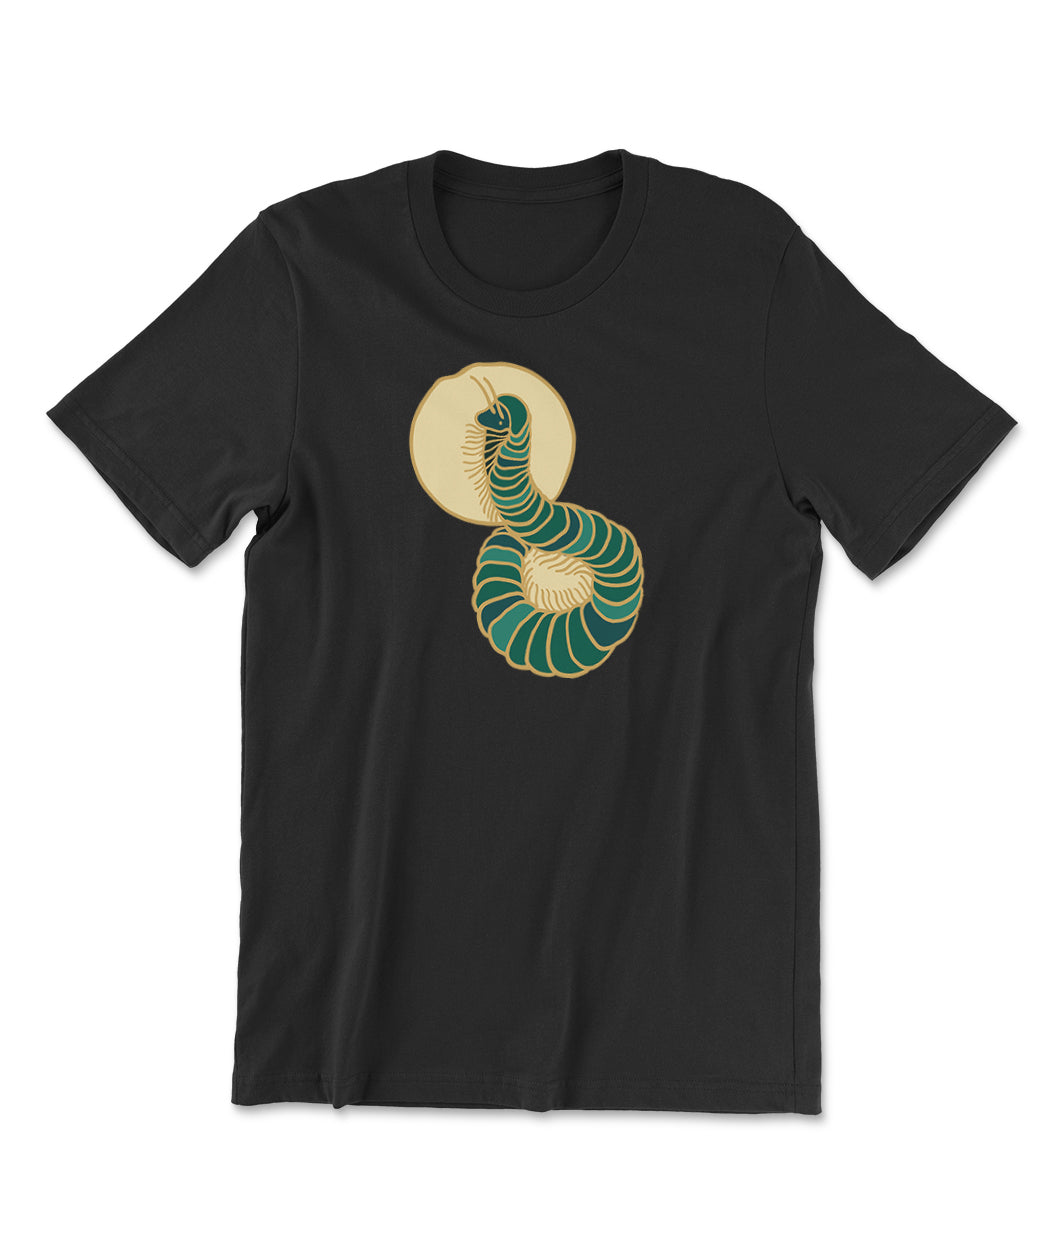 The shirt of the month from Bizarre Beasts is a black t-shirt with the illustration of a millipede in shades of green with a light yellow orb around its head. 